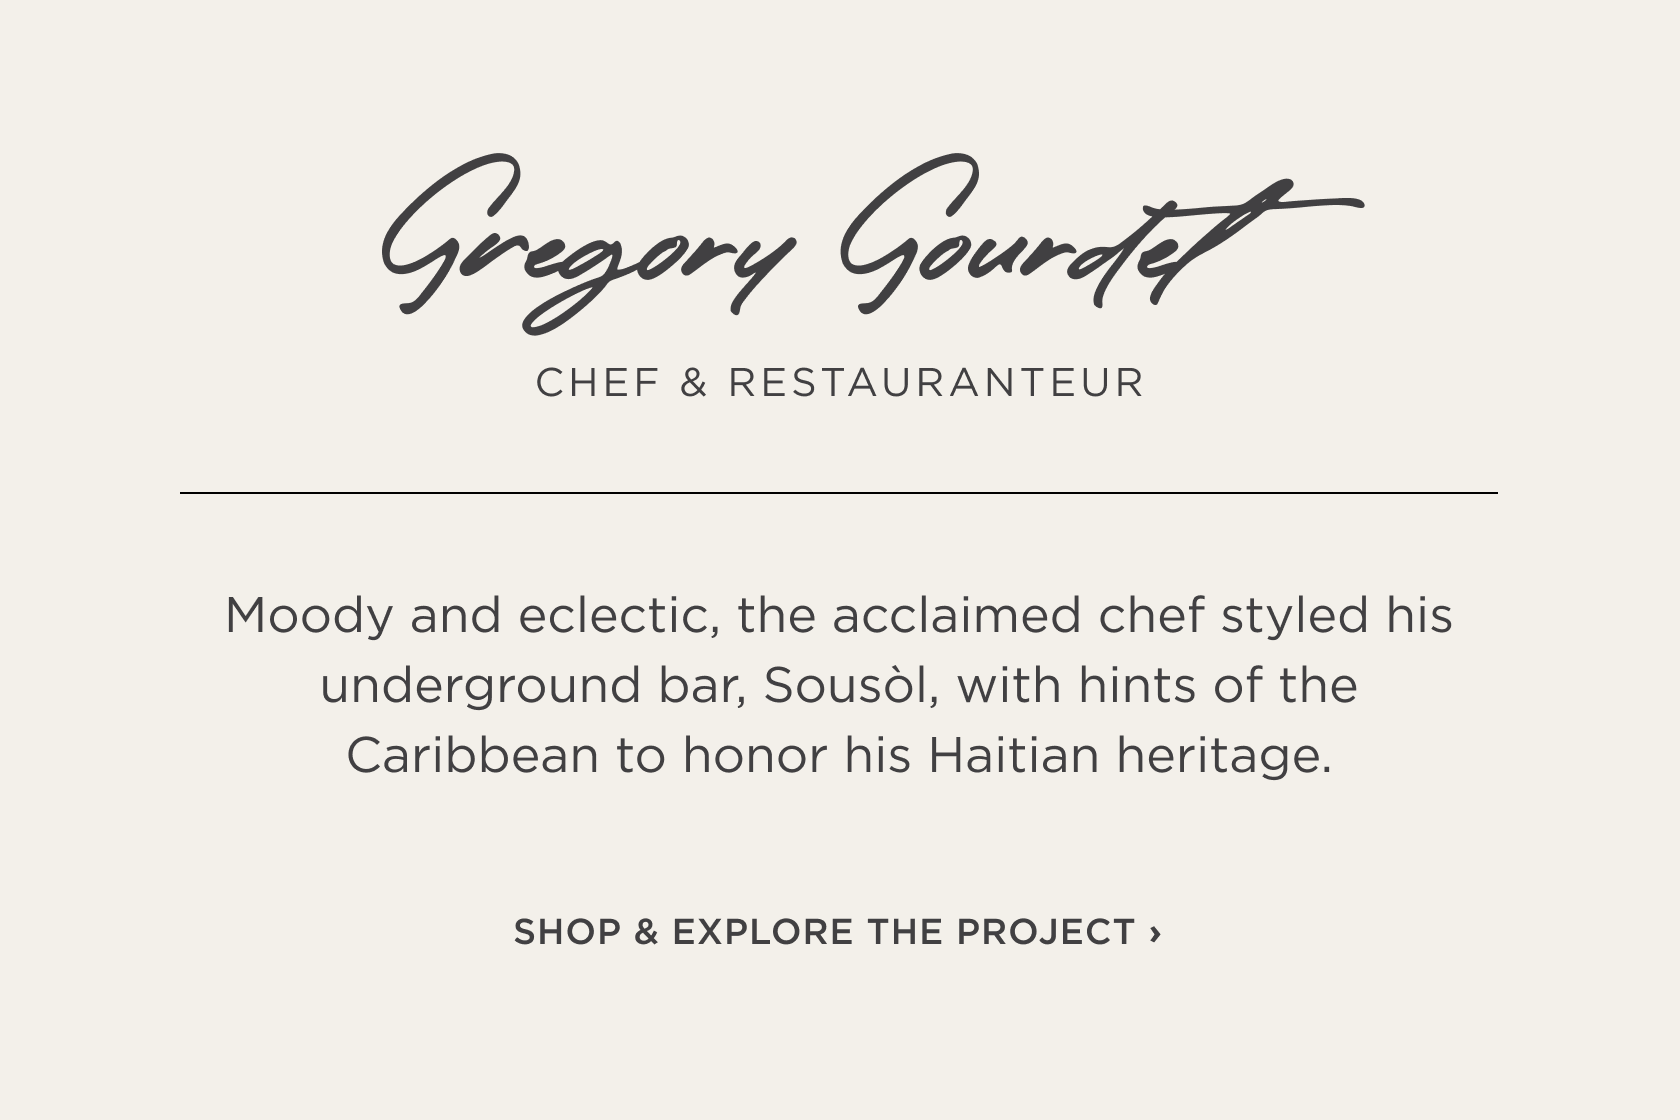 Shop Gregory Gourdet's project